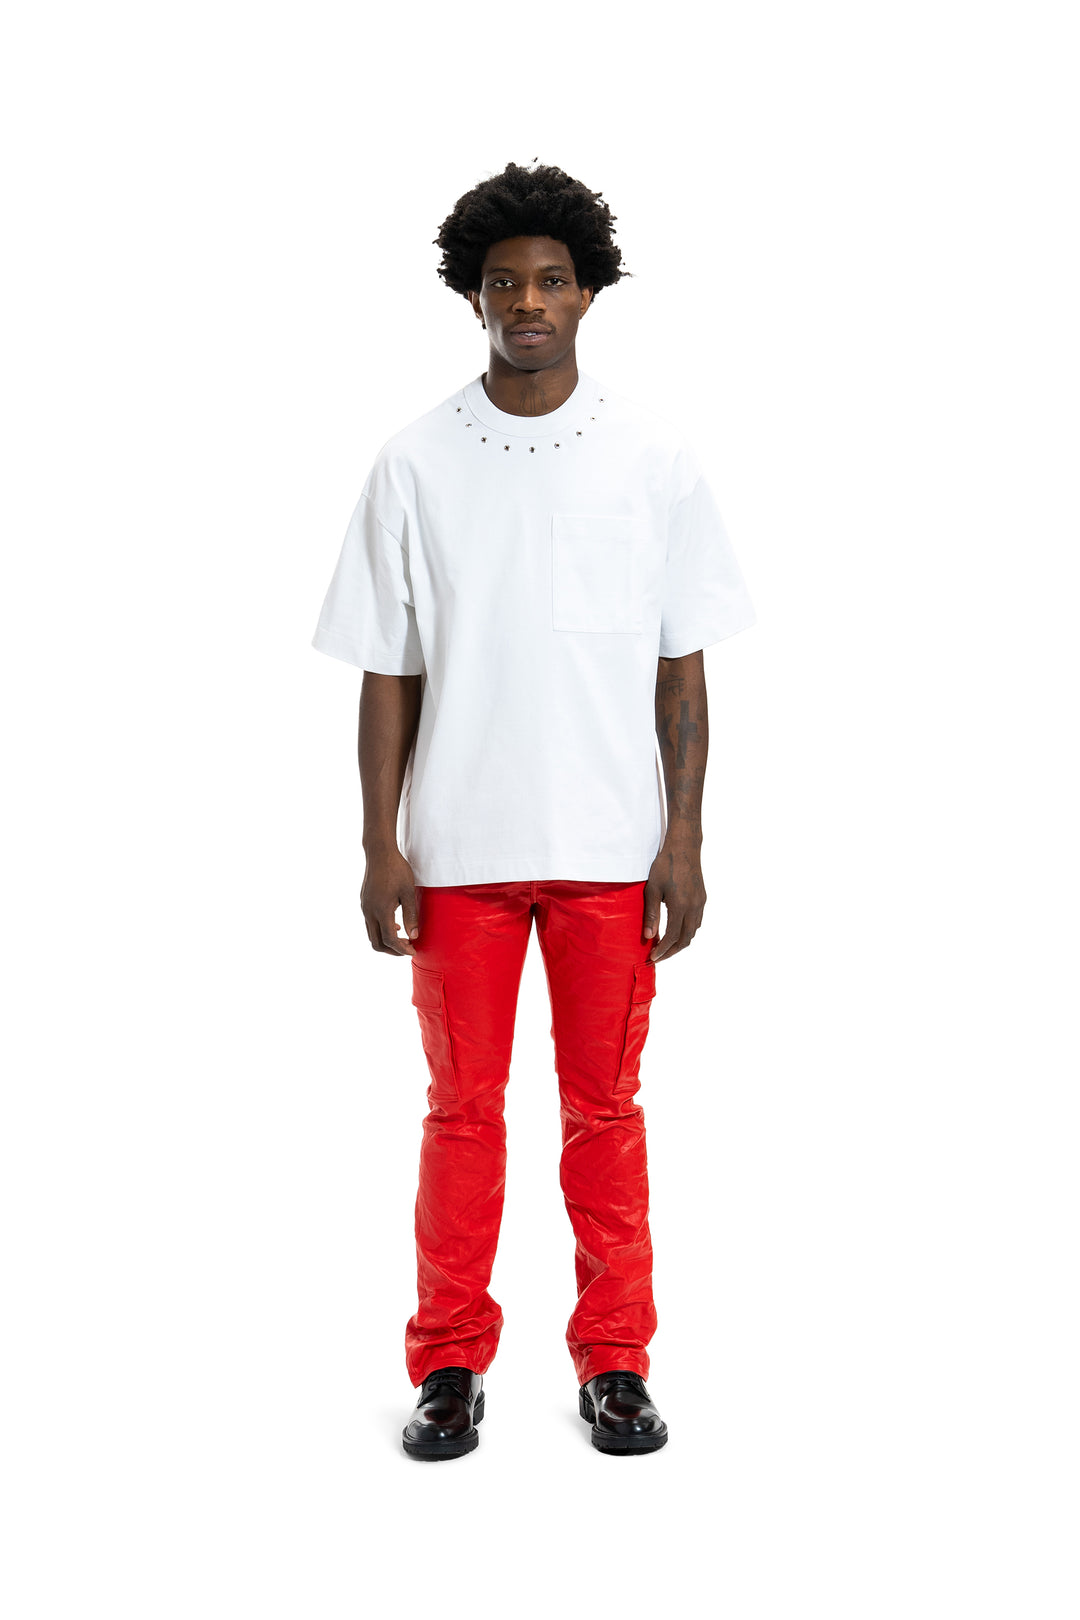 Purple Brand P004 Flare Jeans - Red Patent Film Cargo Flare